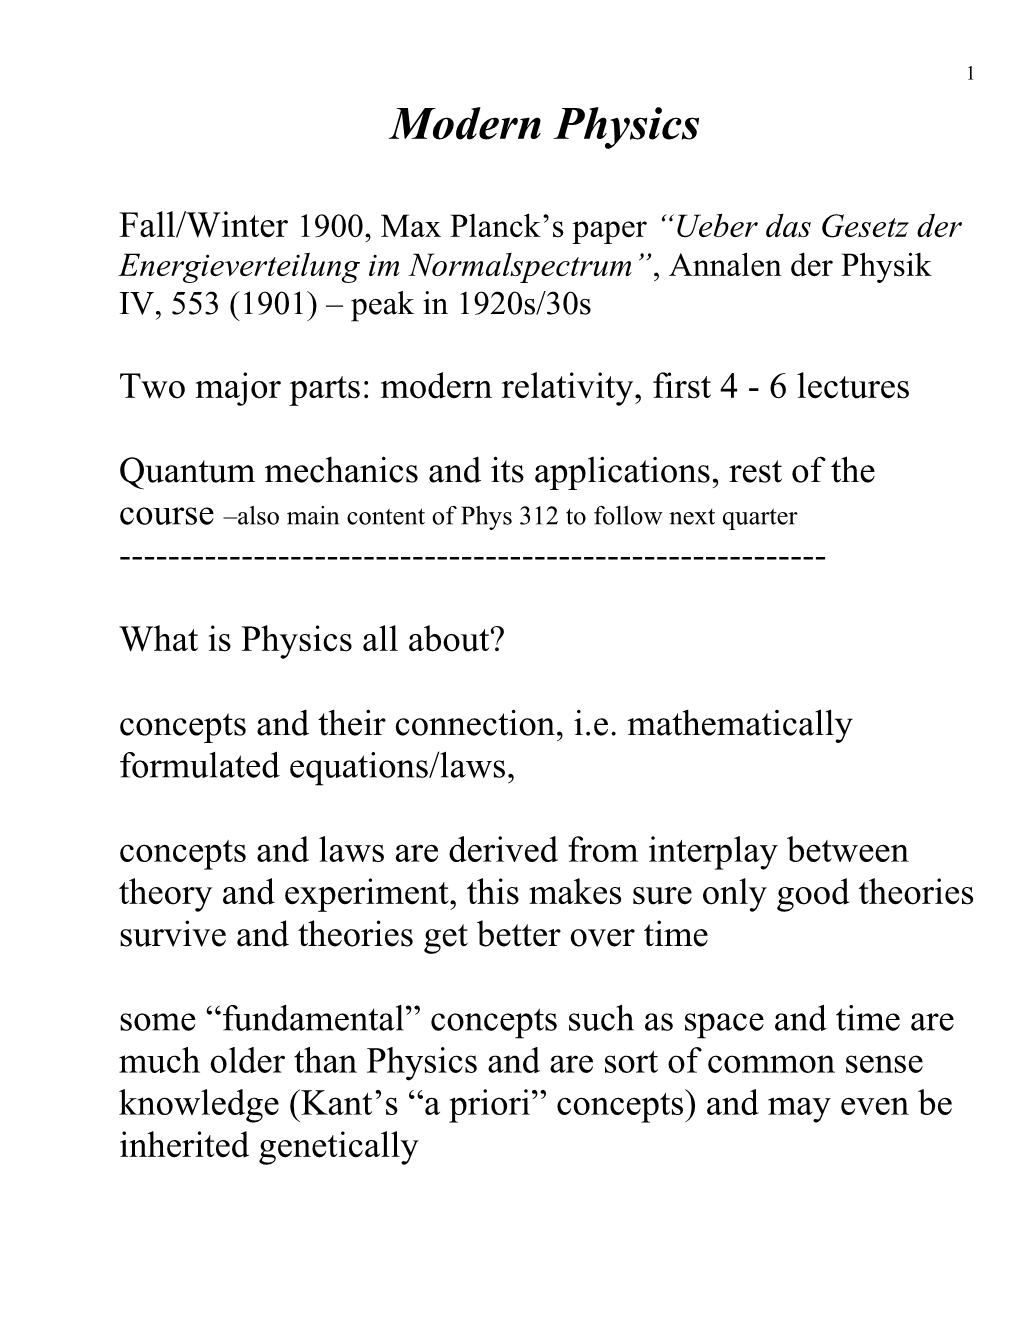 Two Major Parts: Modern Relativity, First 4 - 6 Lectures